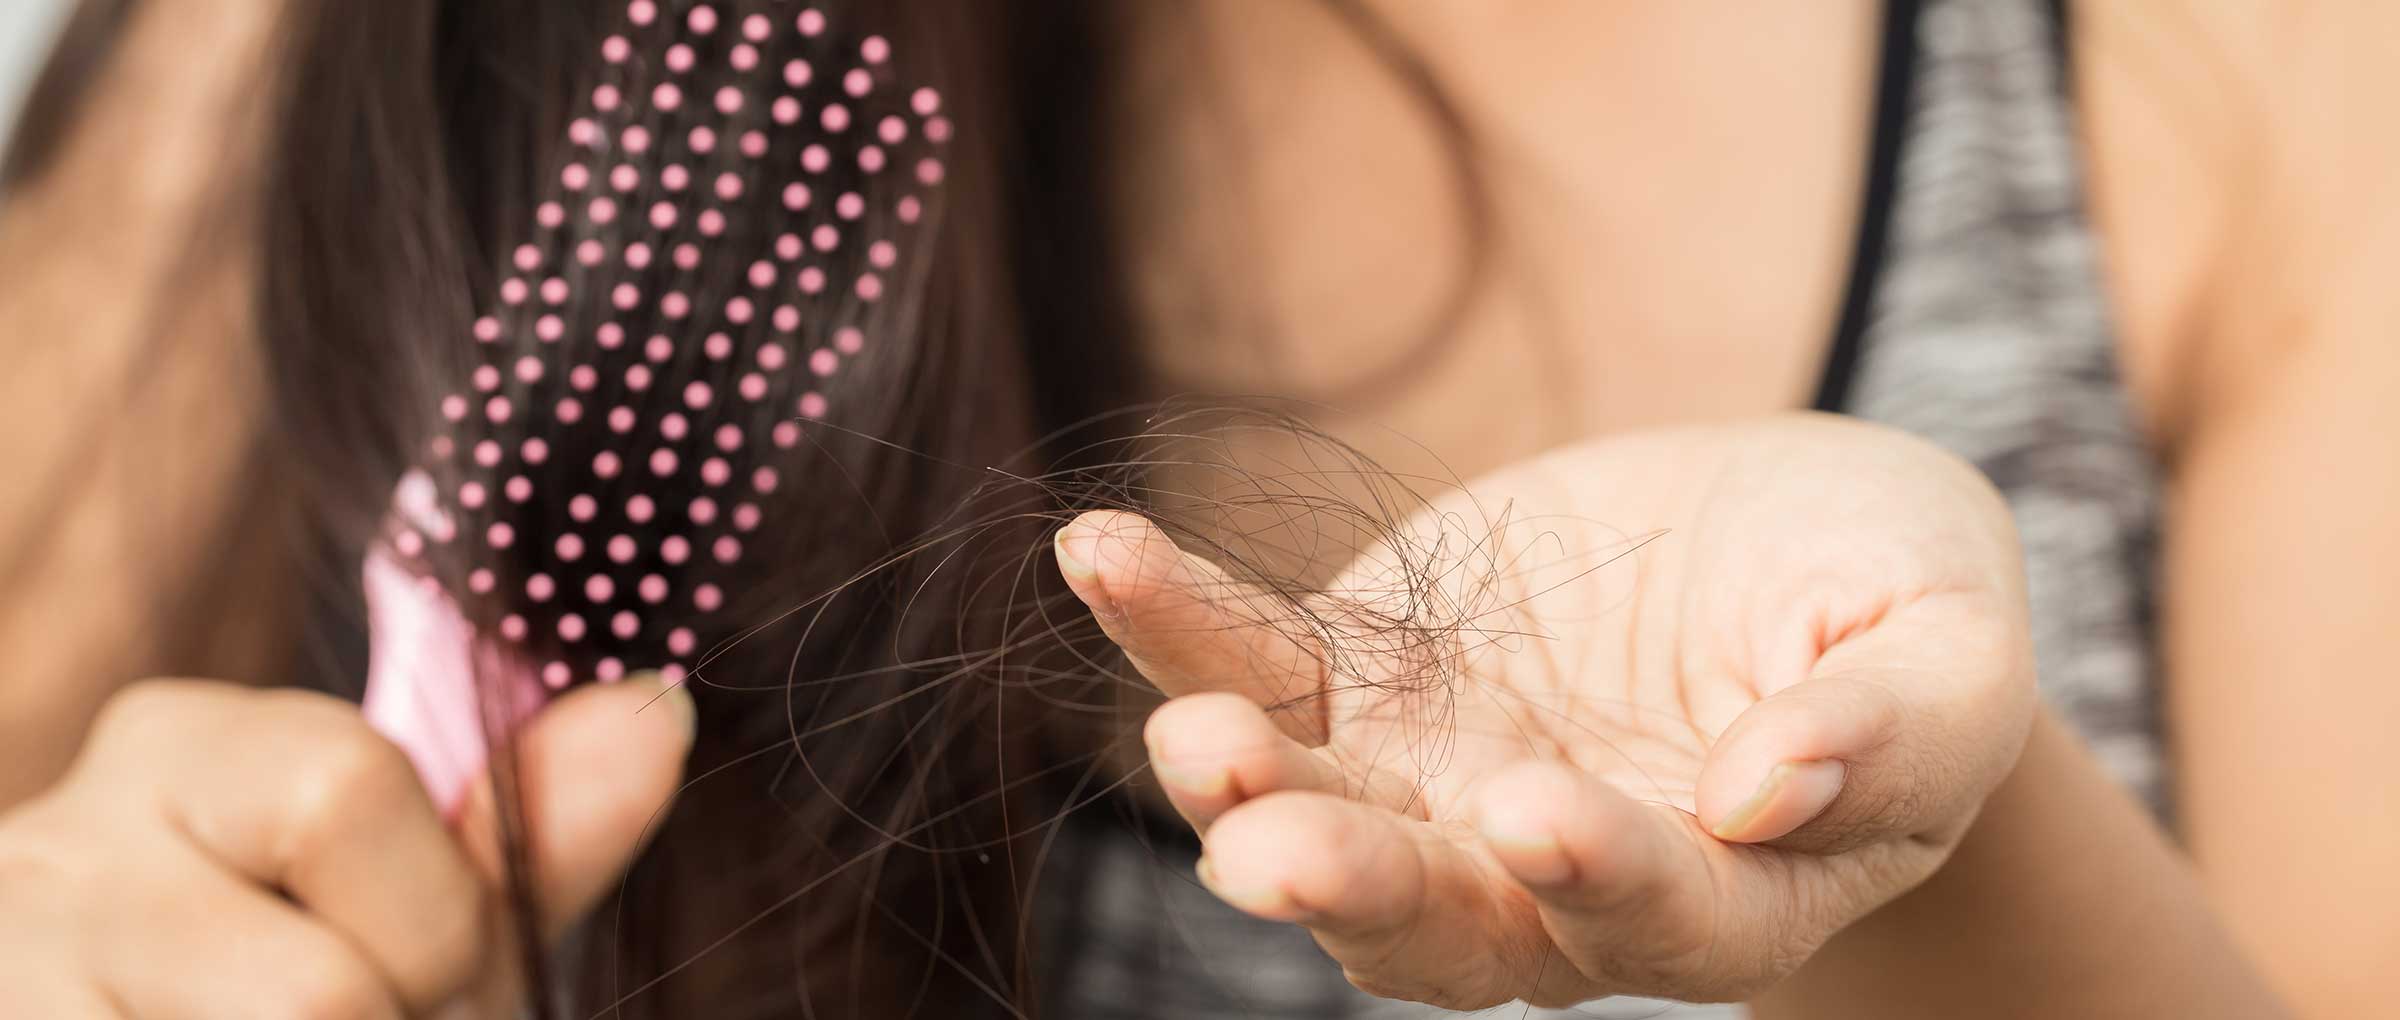 Hair loss after labour